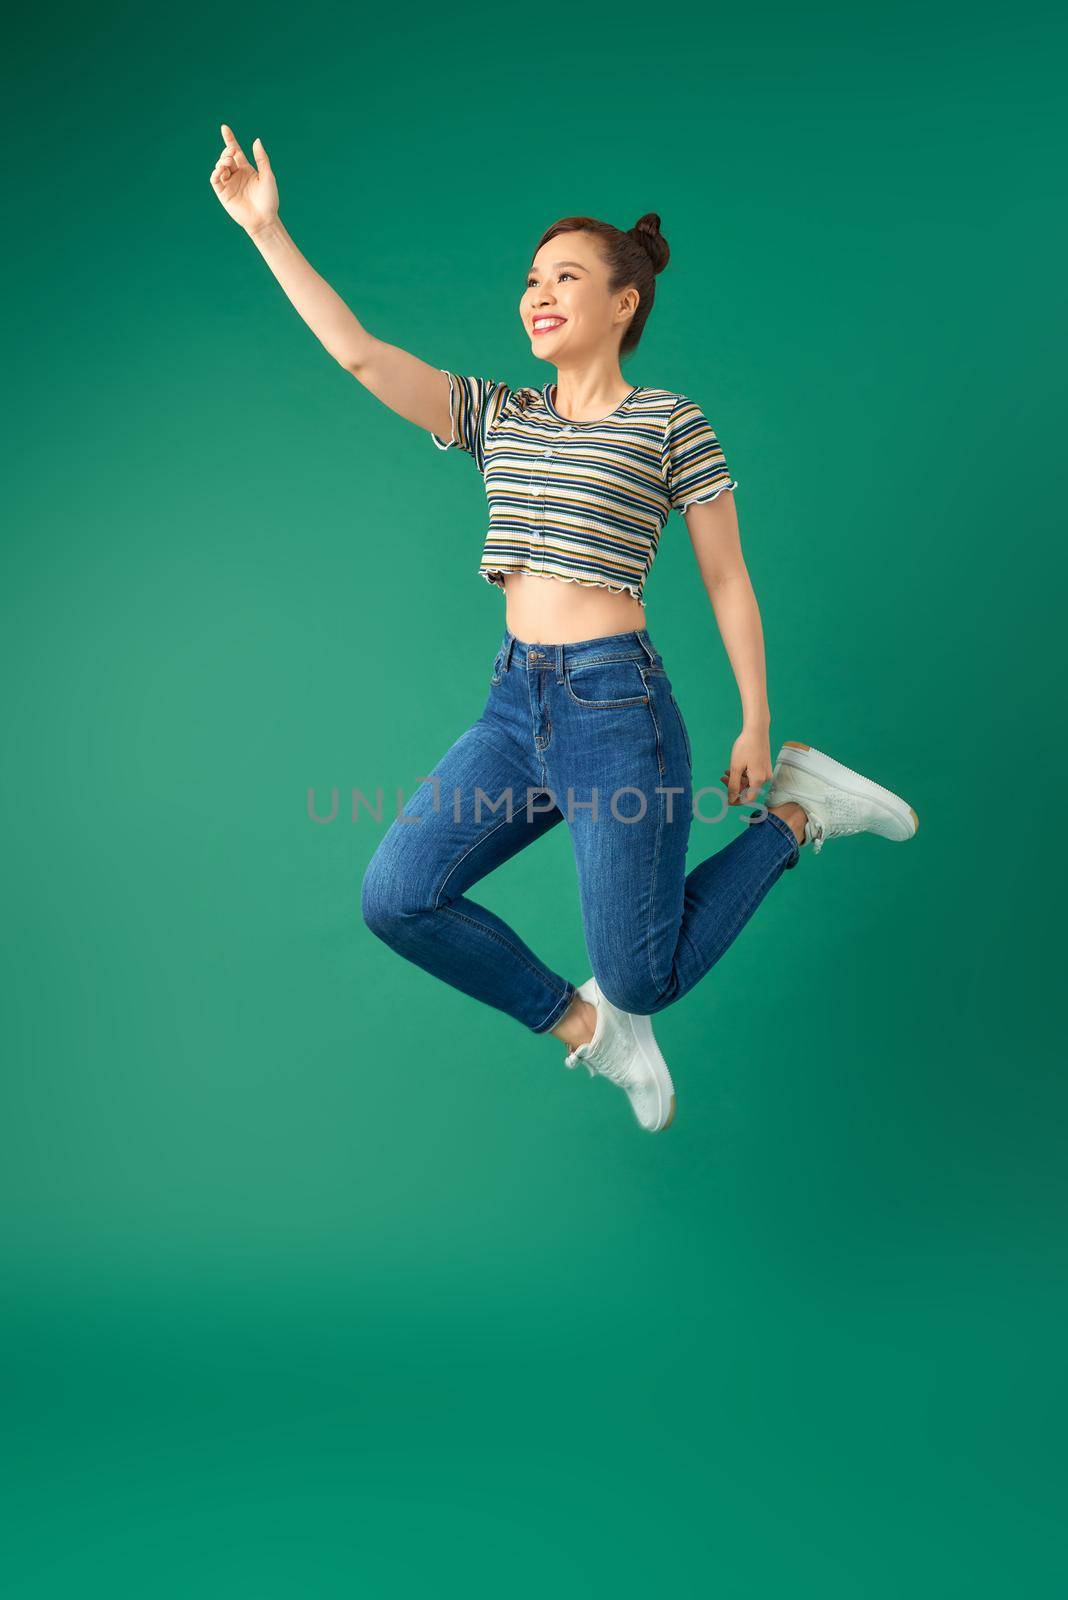 Happiness, freedom, motion and people concept - smiling young woman jumping in air over green background. by makidotvn